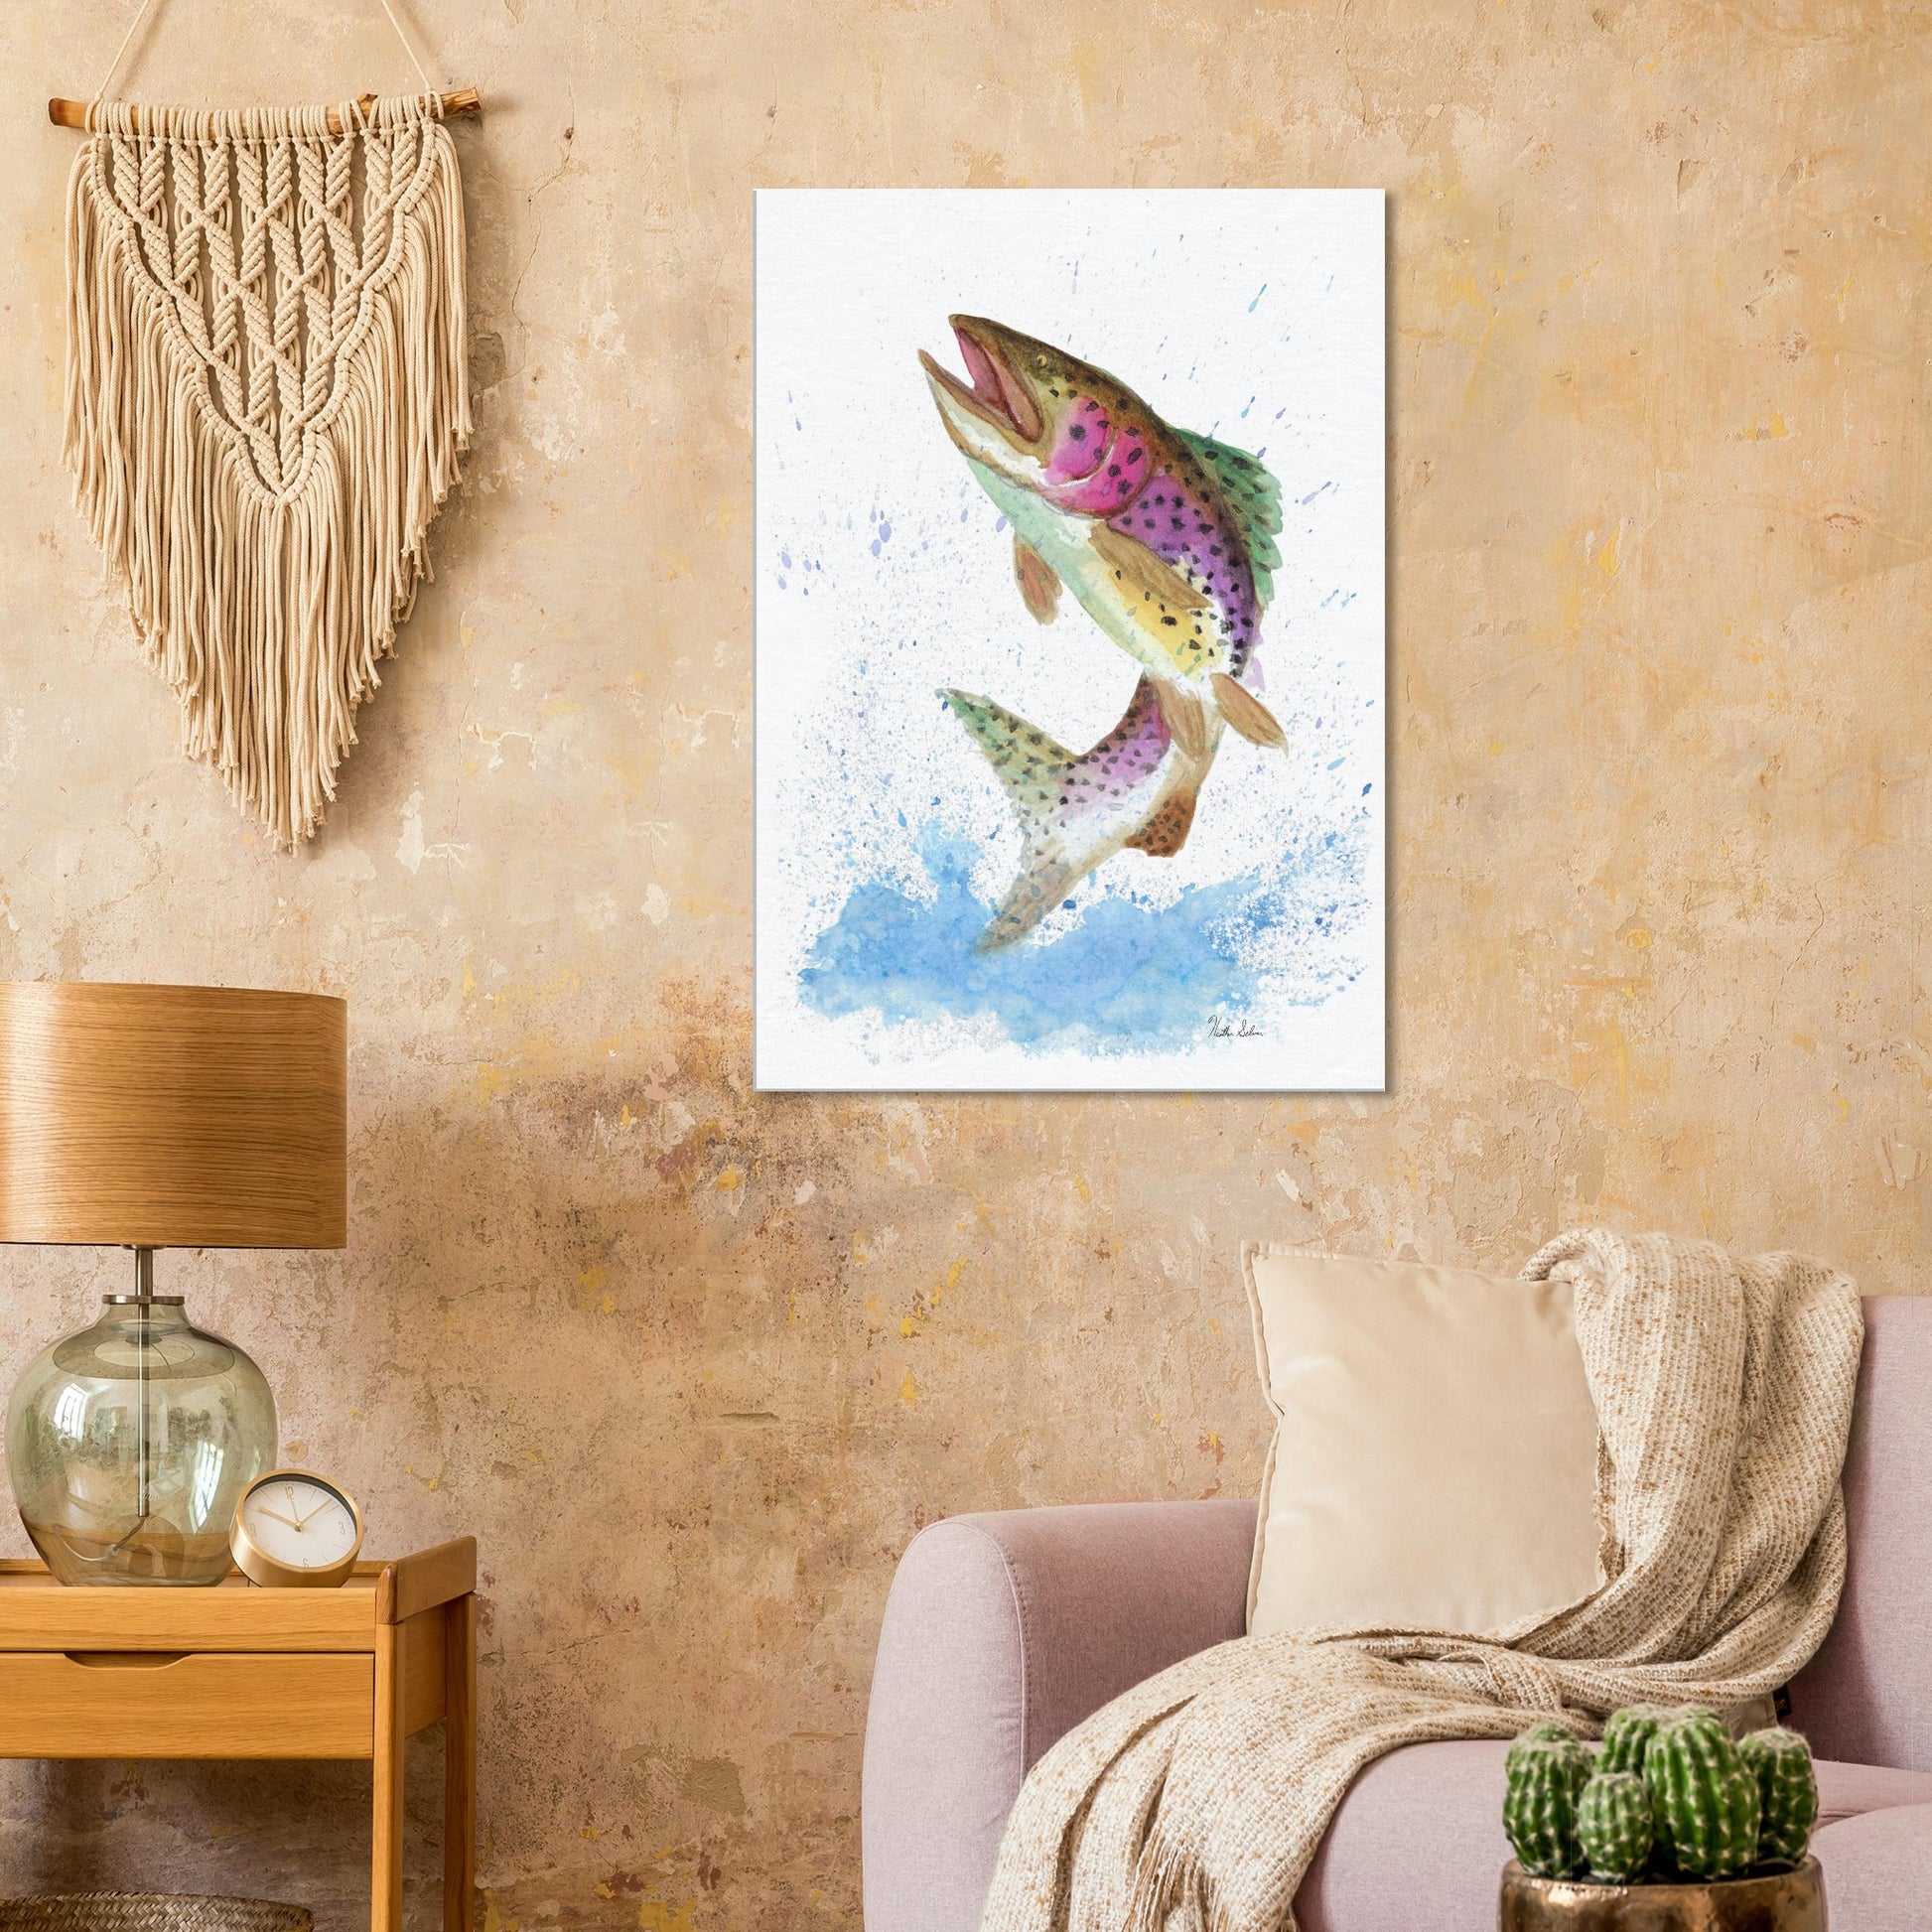 28 by 40 inch slim canvas wall art print featuring a watercolor painting of a rainbow trout leaping from the water. Shown on beige wall by macramé above pink sofa, wooden end table, and lamp.